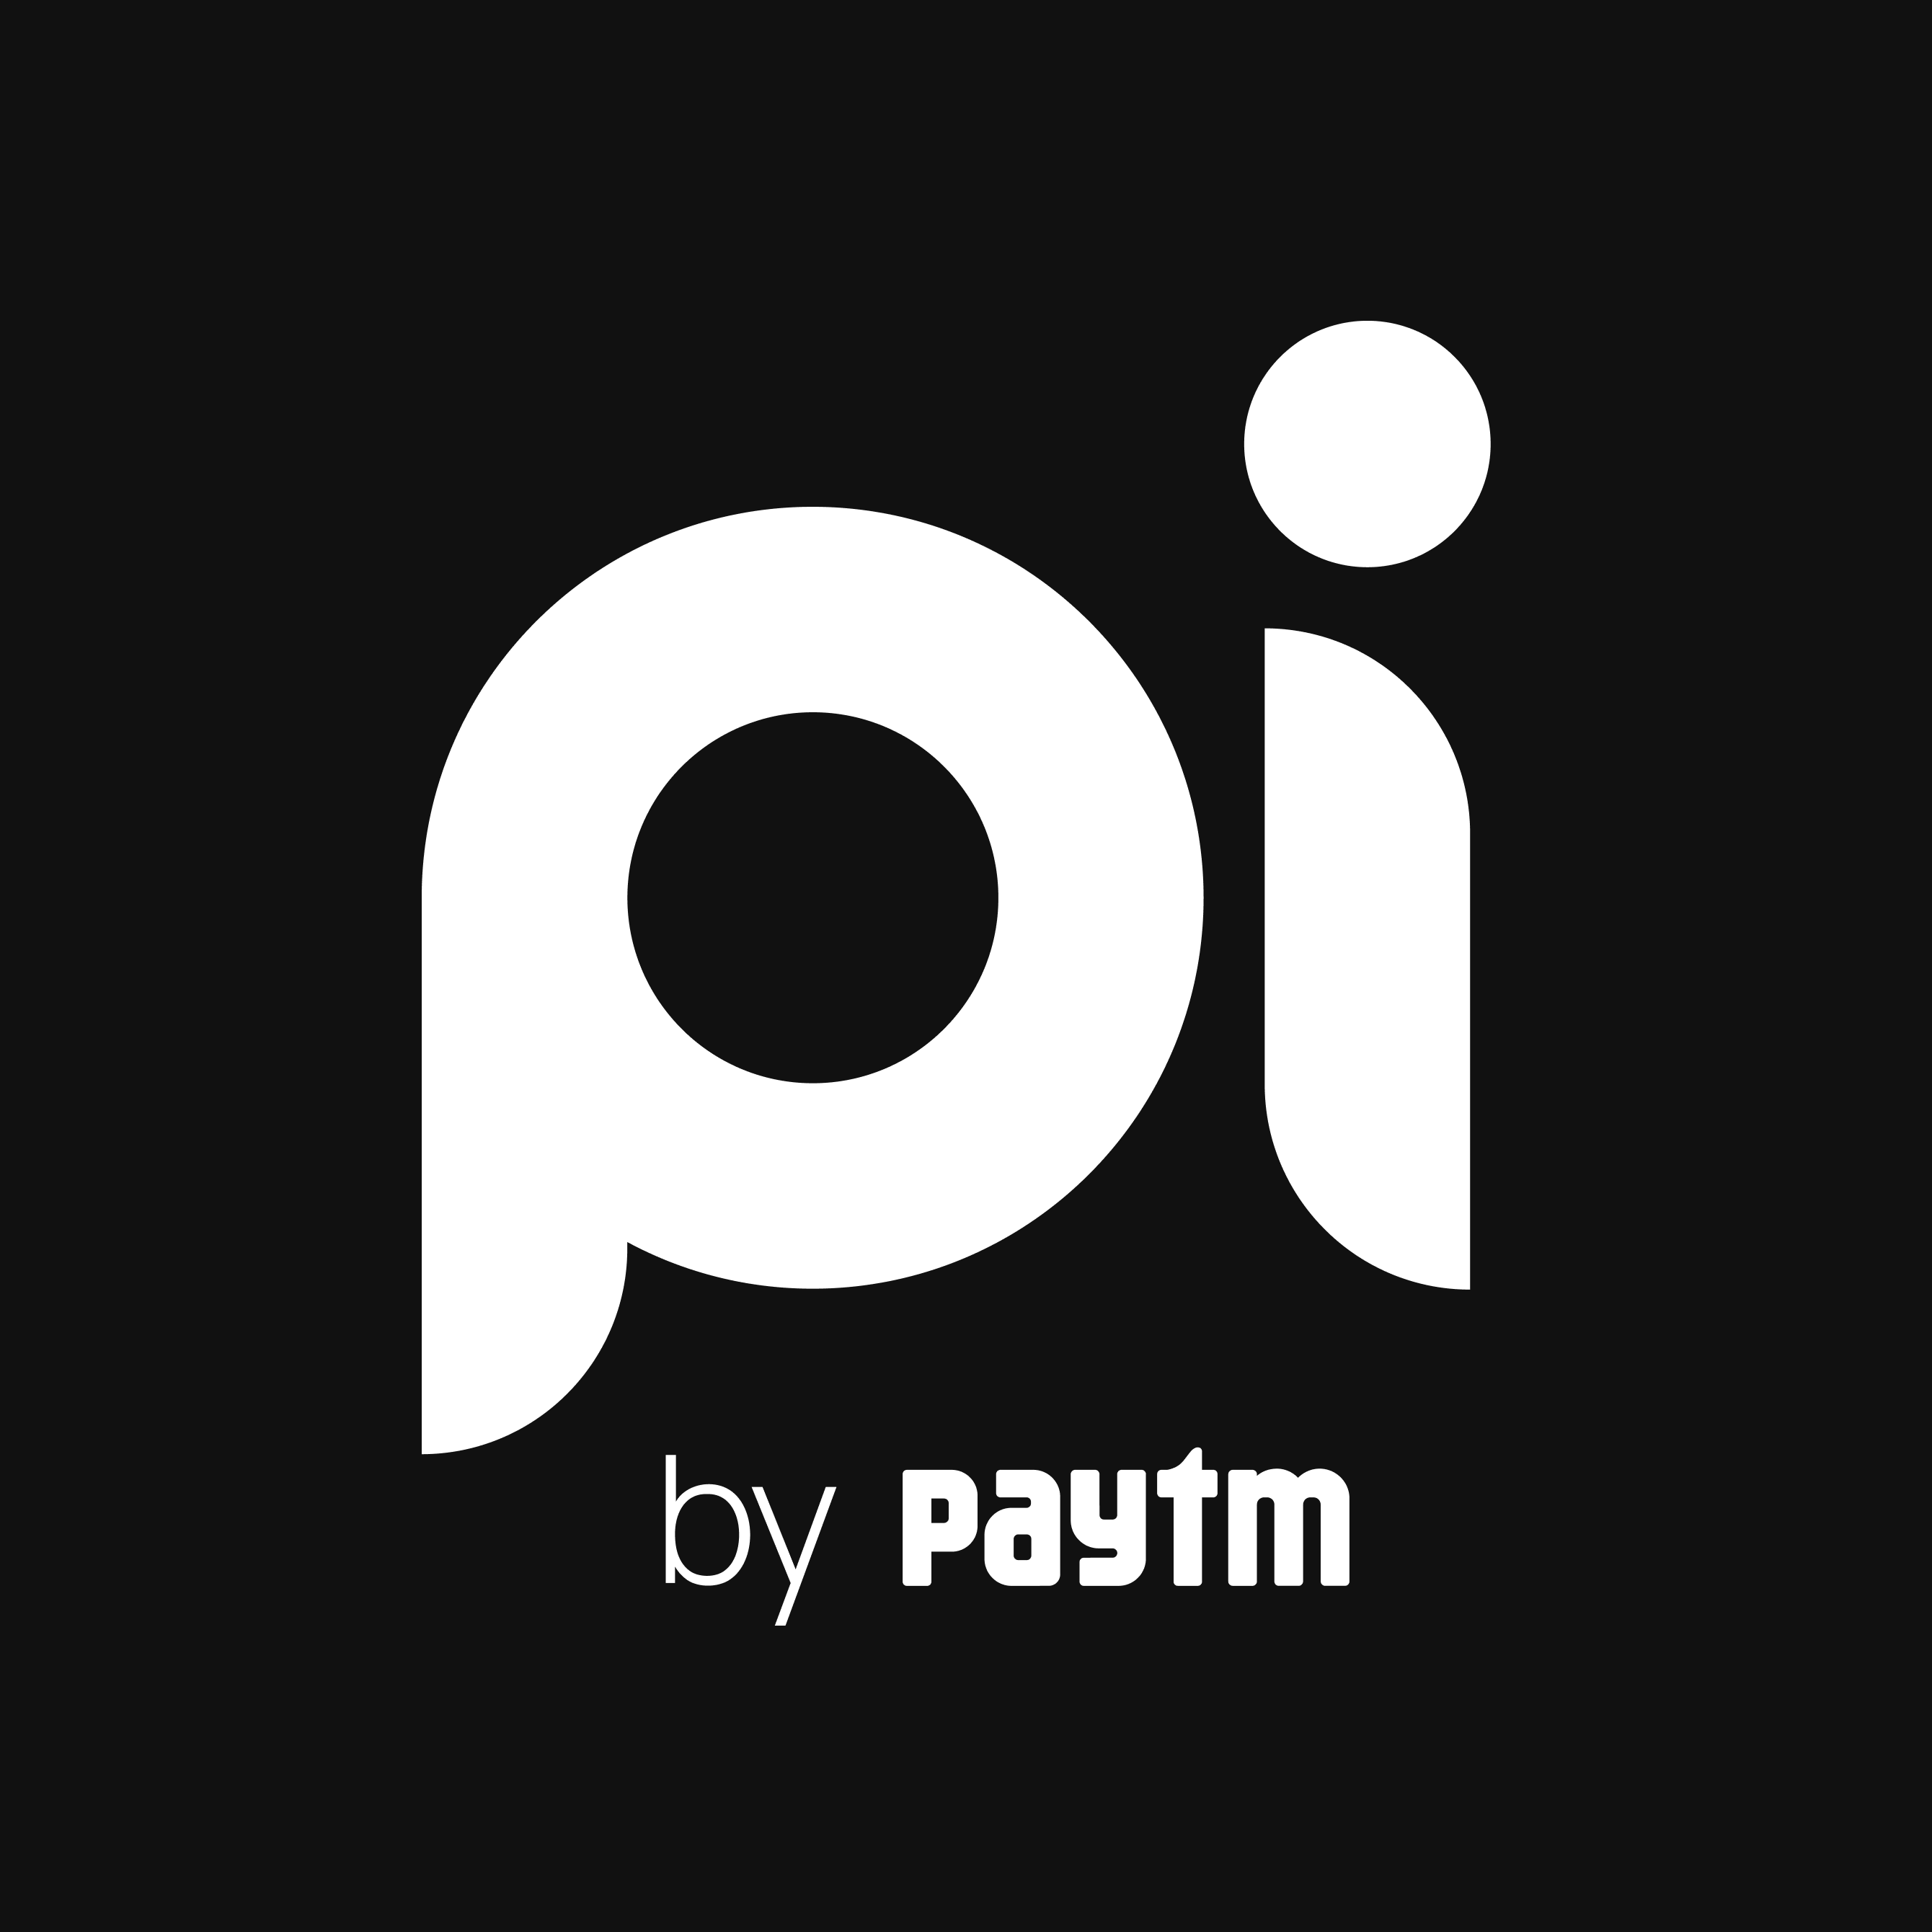 Paytm Software - Pi by Paytm - Online Fraud and Risk Management Software